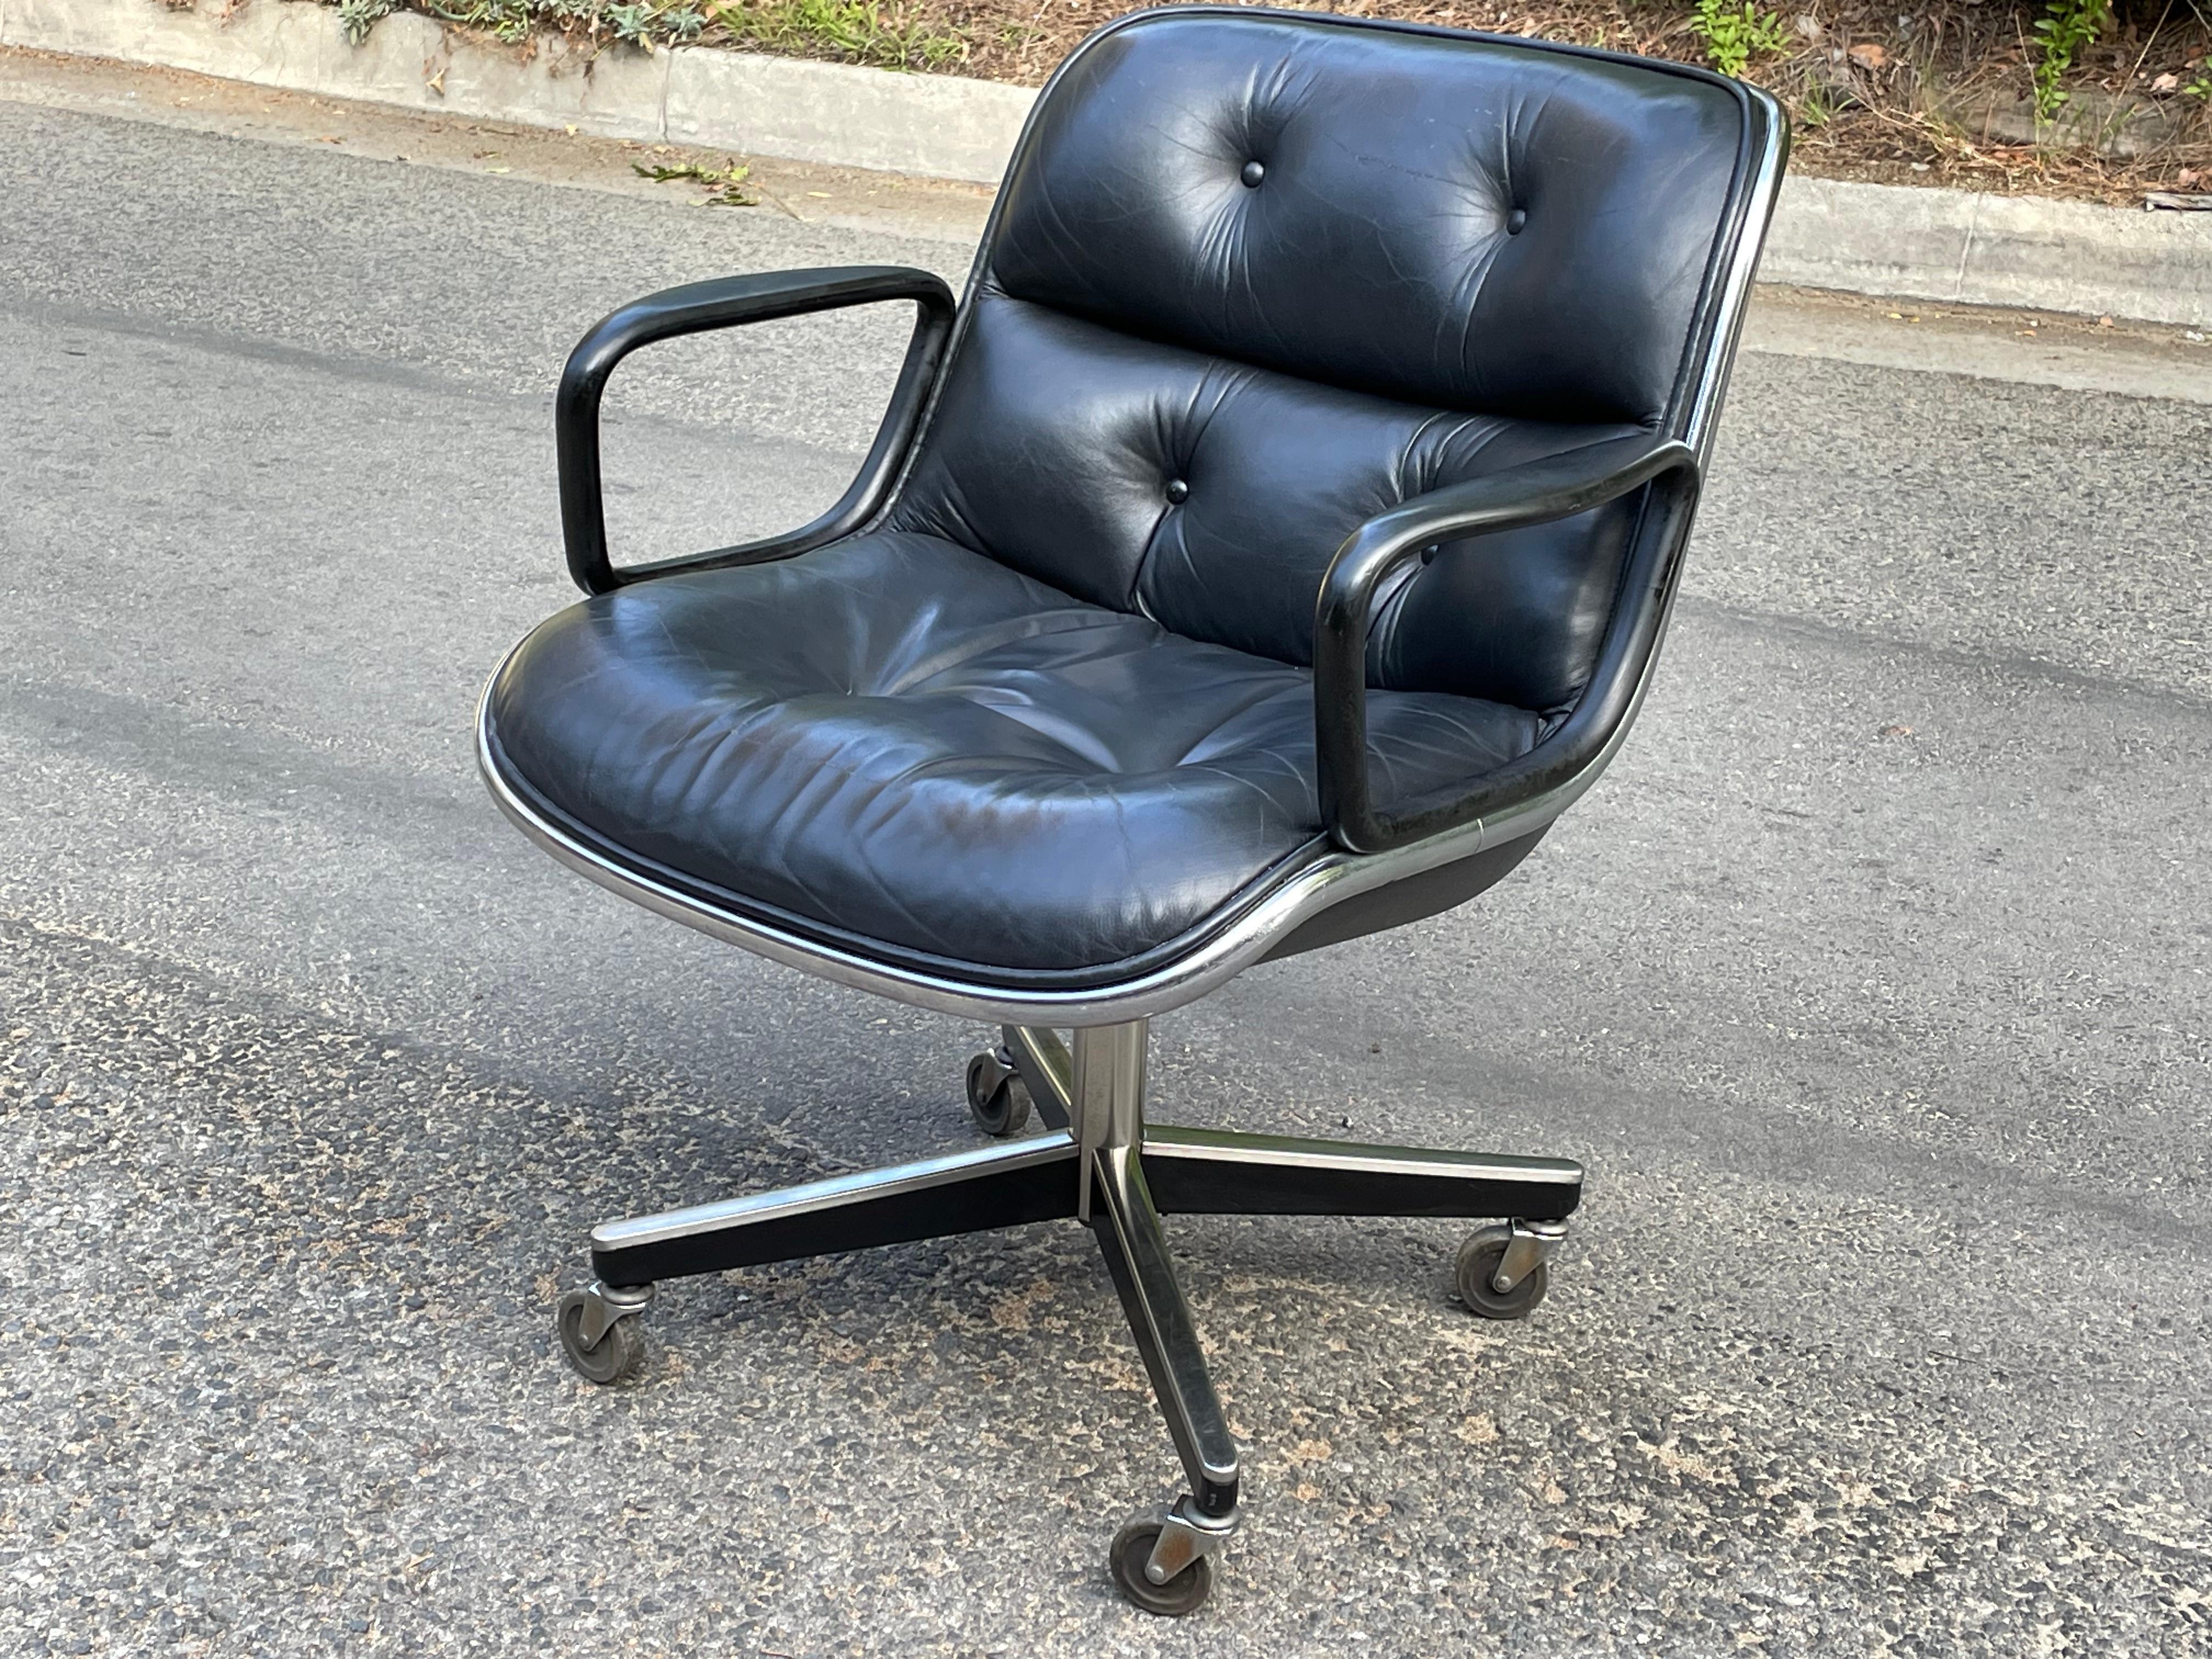 Gorgeous vintage original black leather Pollock desk chair designed by Charles Pollack for Knoll. Features original black leather in very good original condition.

On 4-star chrome pedestal bases. Knoll tags underneath.

Note: 6 Knoll Pollock chairs